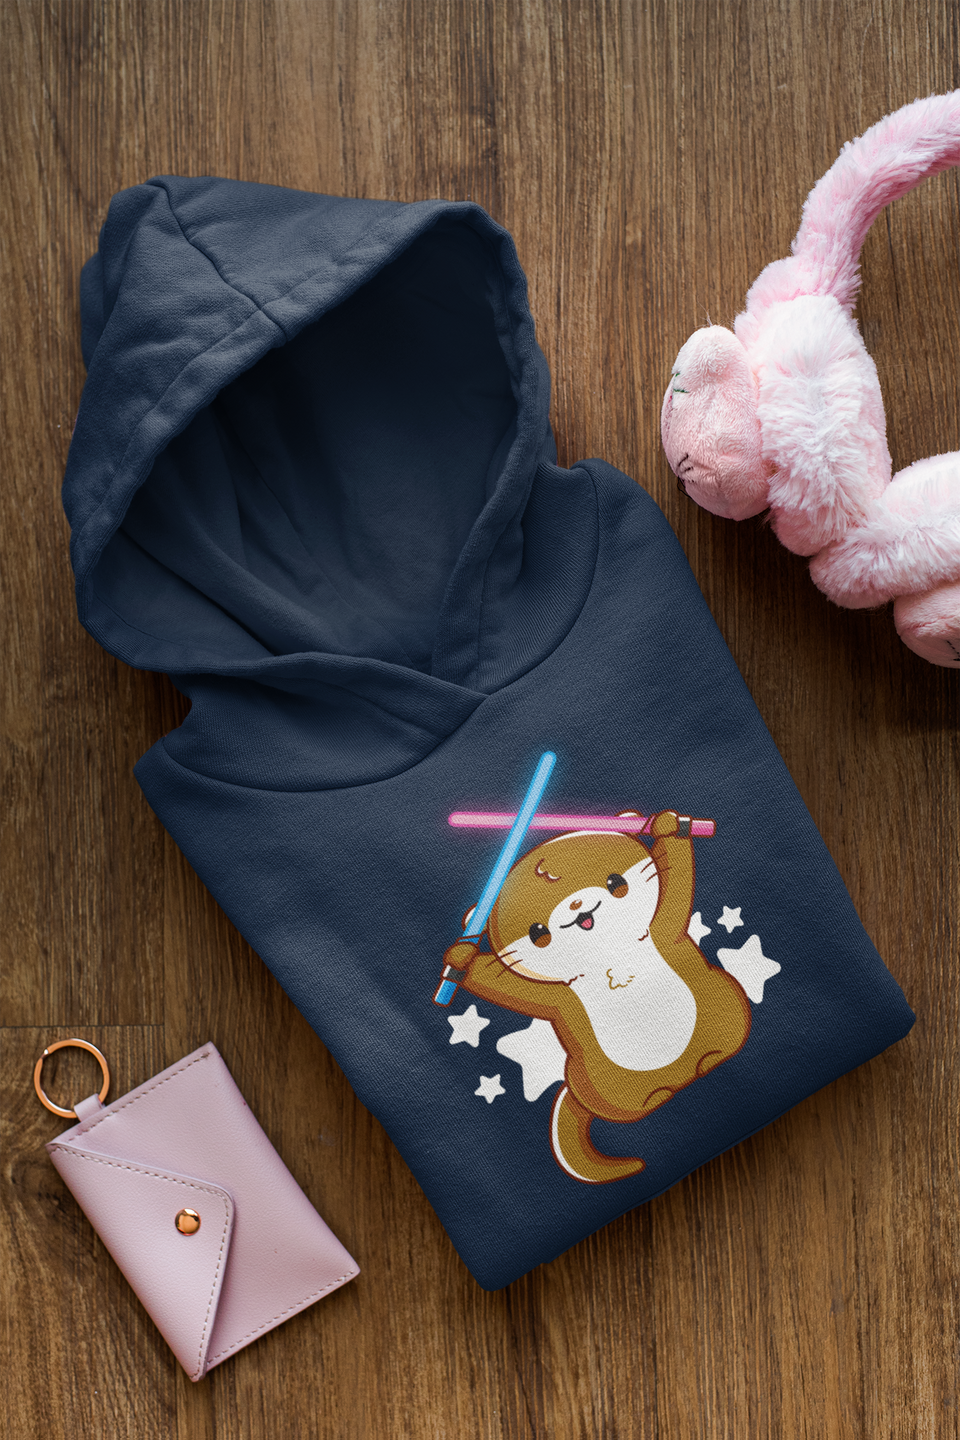 Otter-ly Adorable Unisex Hoodie